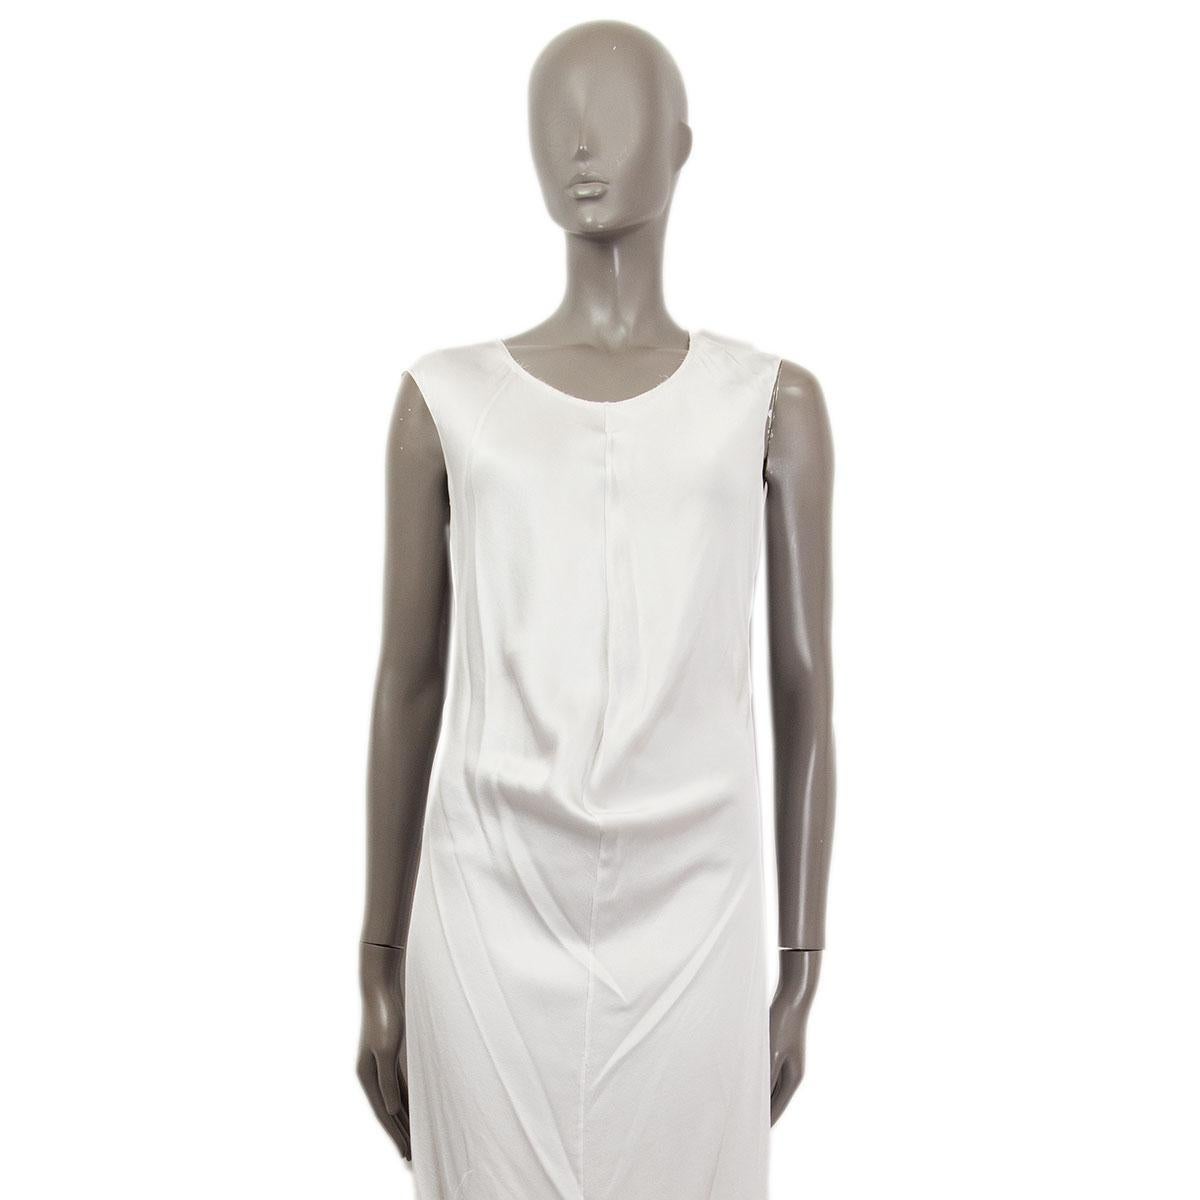 100% authentic Yves Saint Laurent vintage slip dress in light silver silk (100%) with a fitted silhouette. Round neckline, sleeveless , dipped front hemline and slightly stretchy fabric. Has been worn and shows minor imperfections at the lower